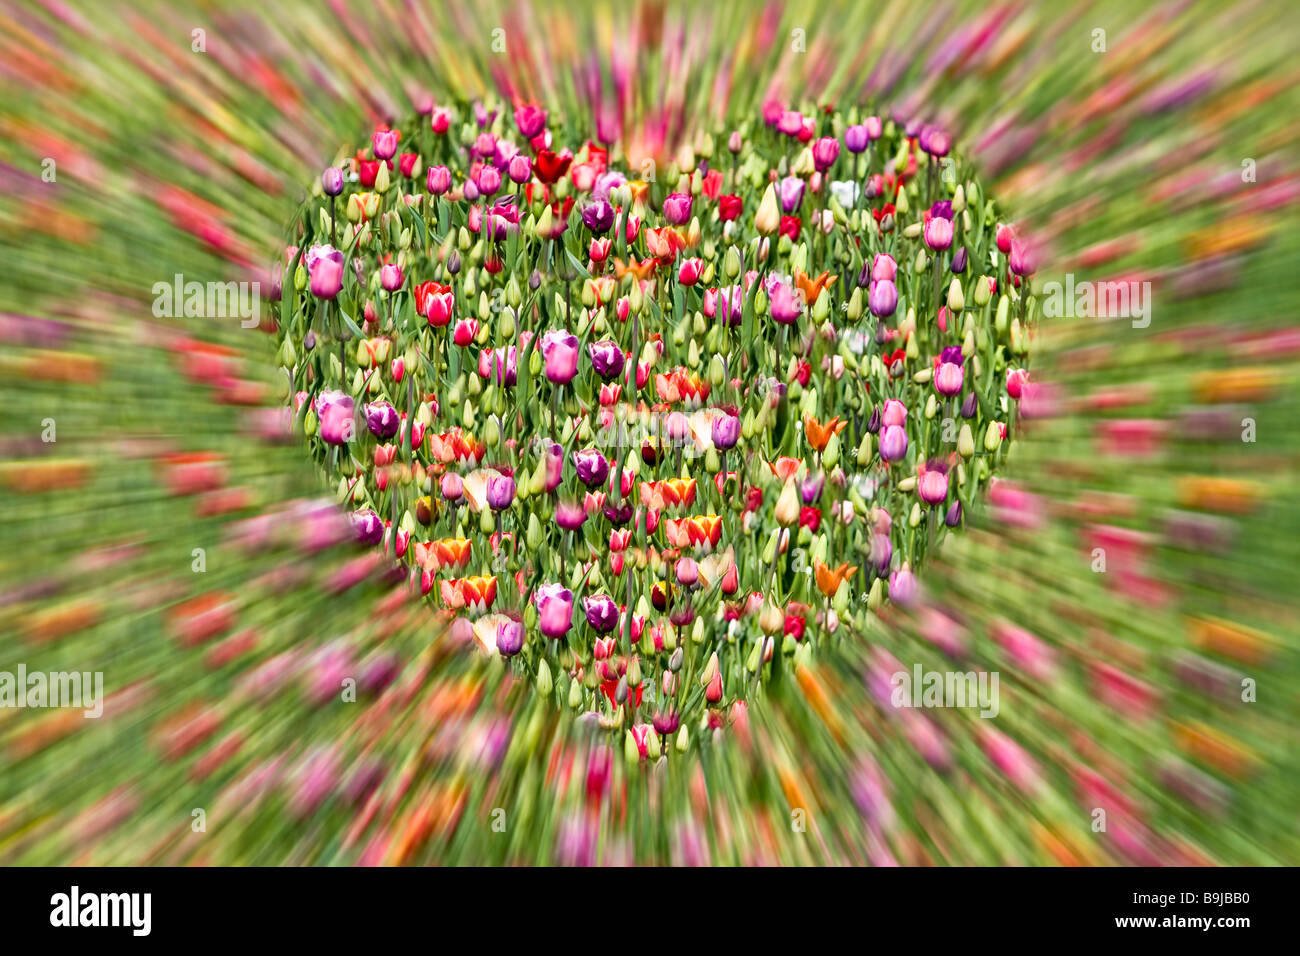 A heart made of tulips Stock Photo